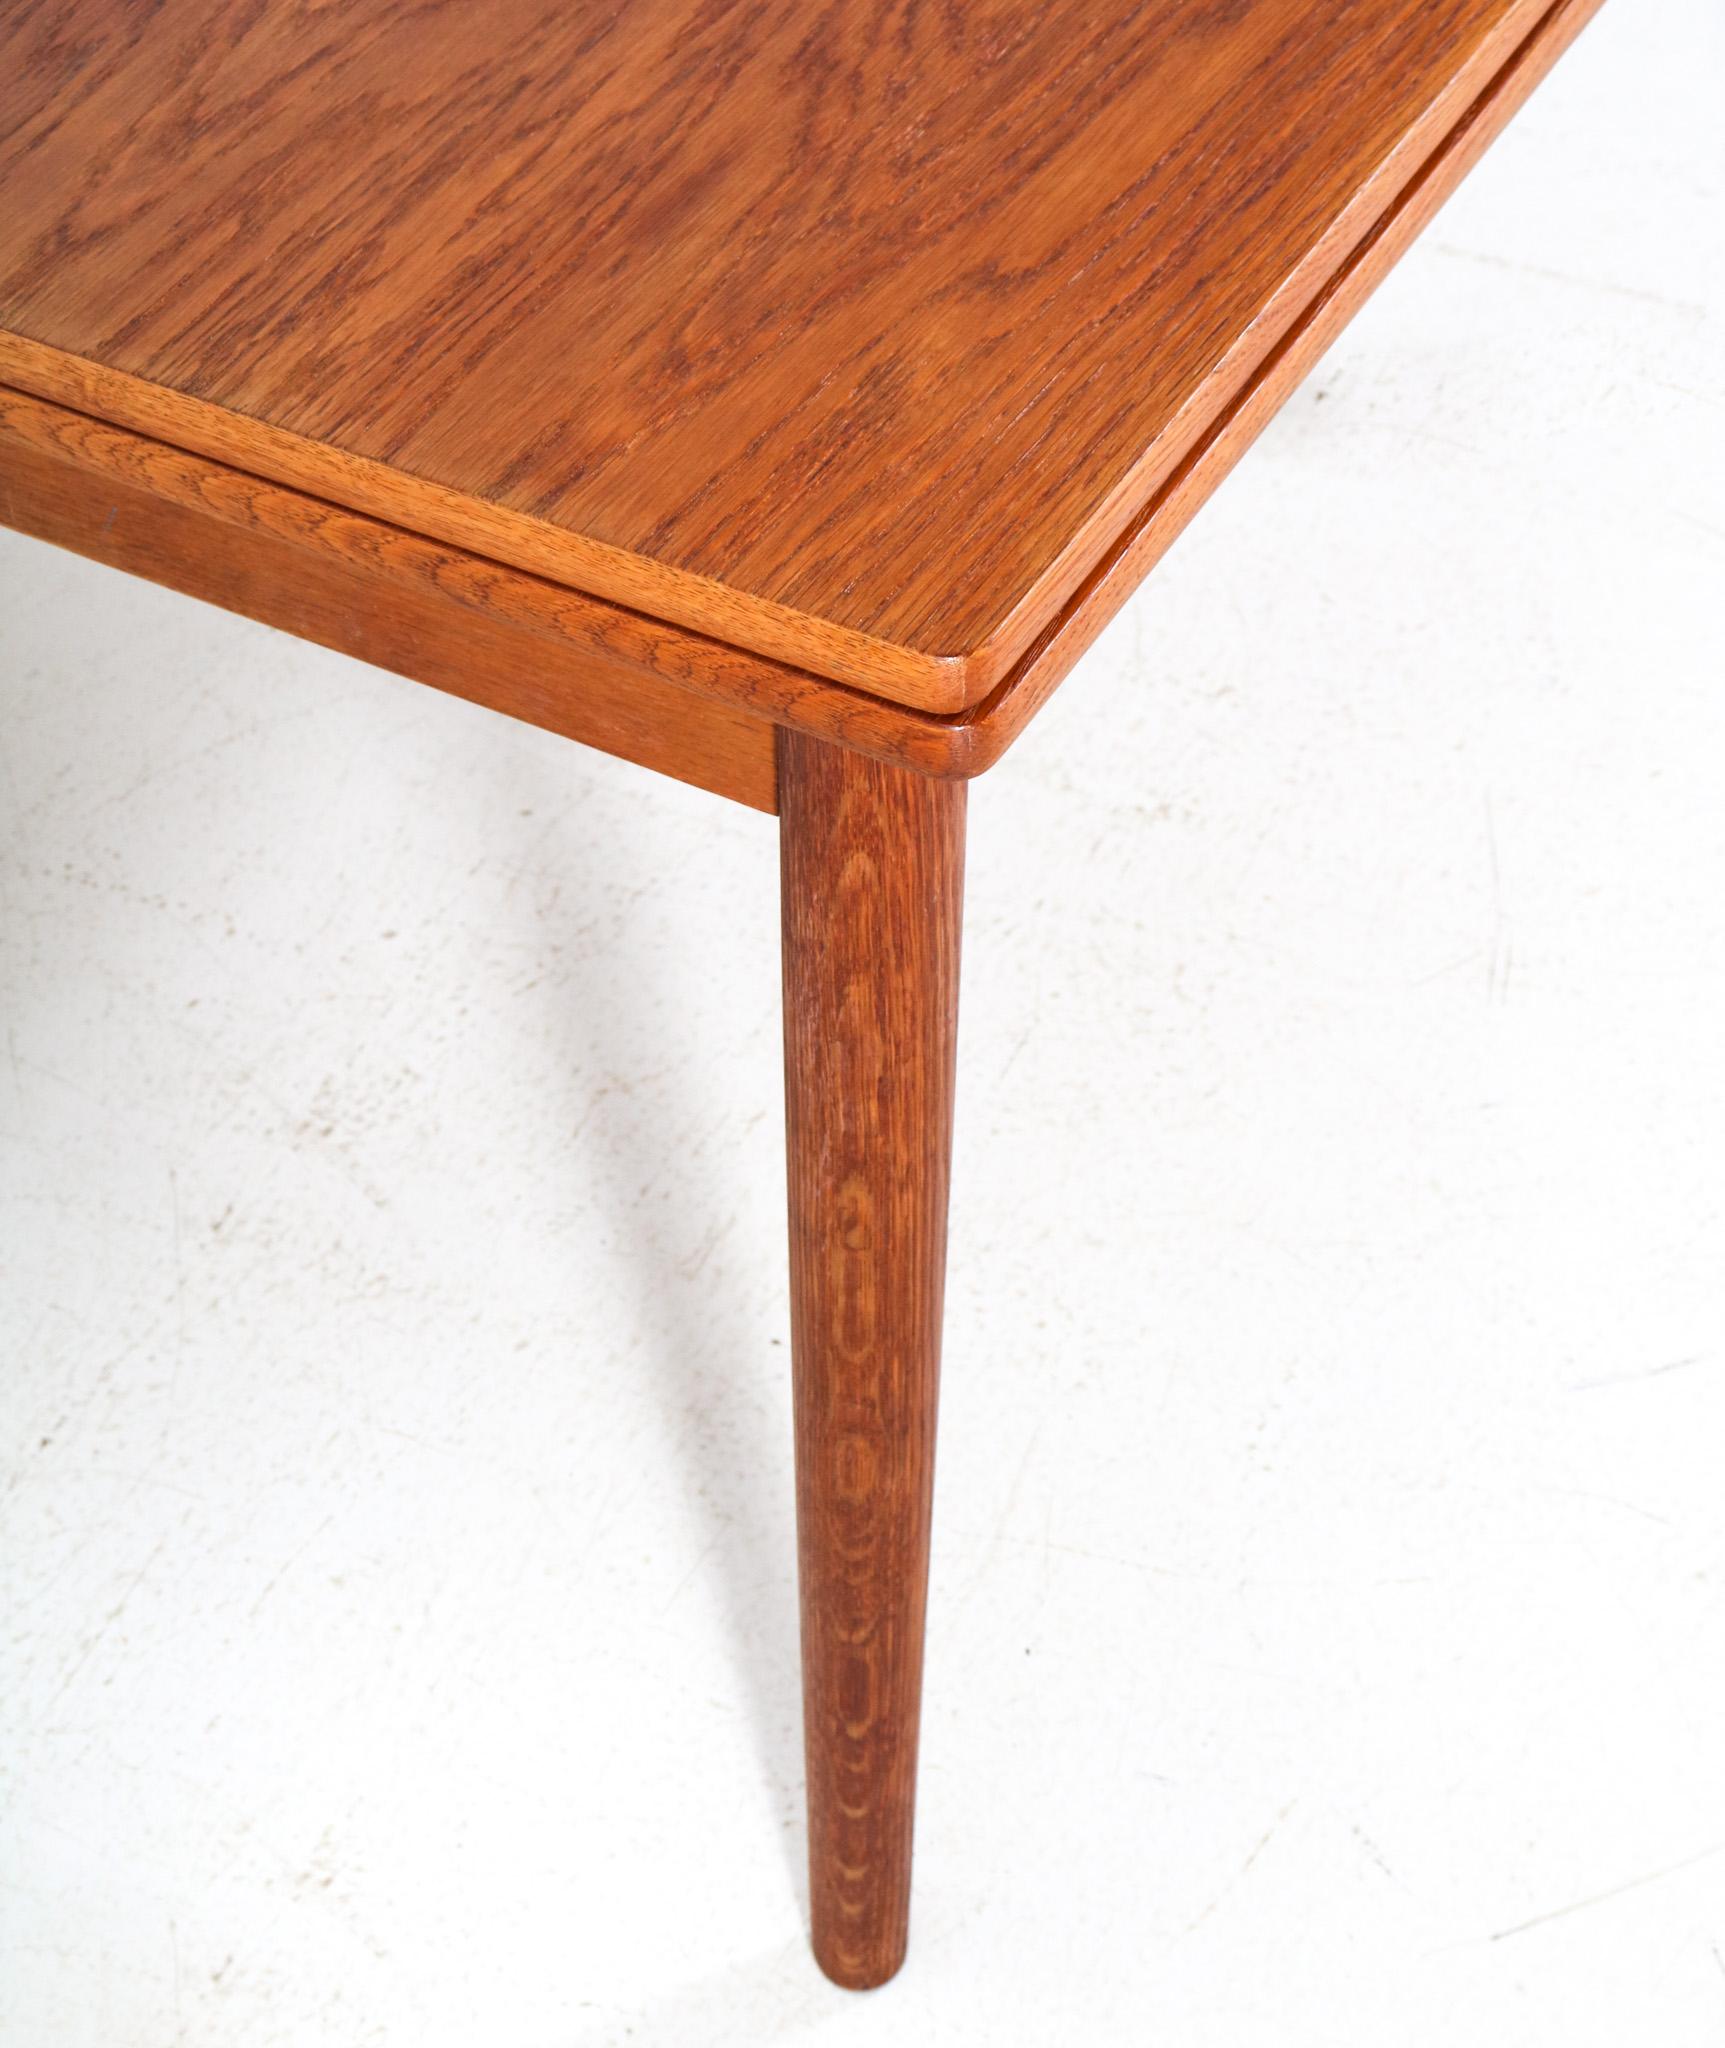  Mid-Century Modern Teak Extendable Dining Room Table Mo. 215 by Farstrup, 1960s For Sale 3